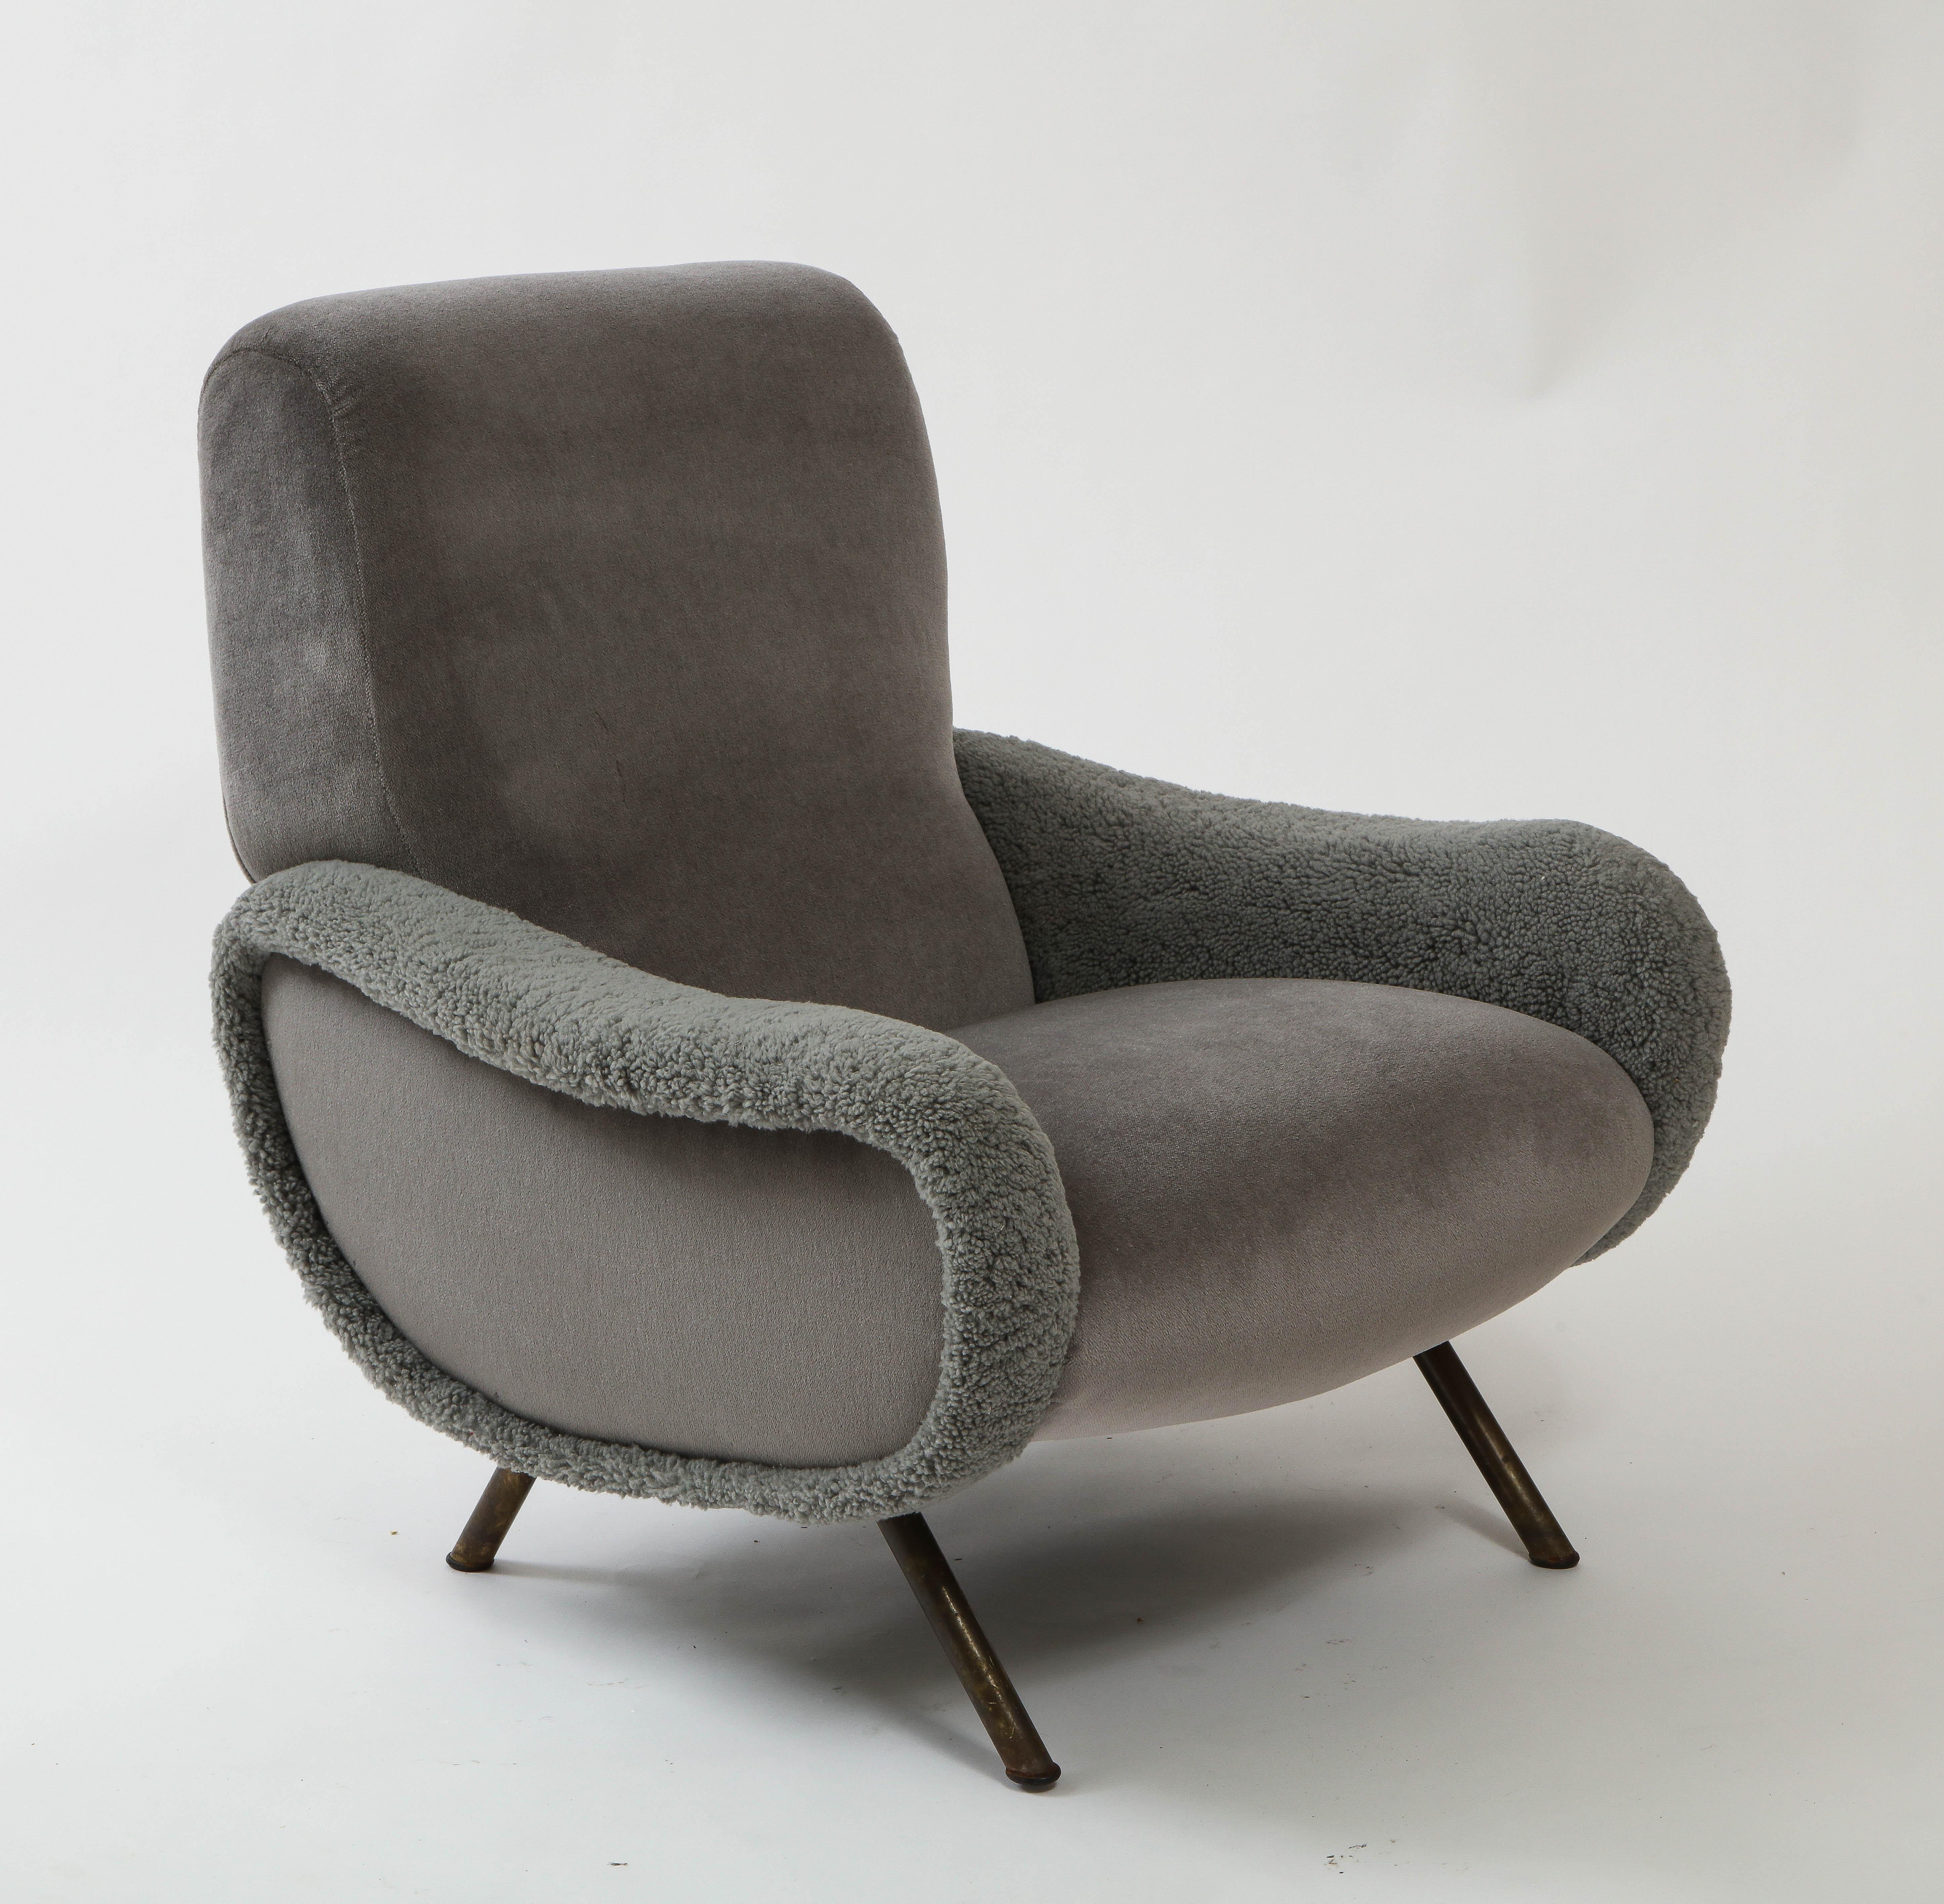 Marco Zanuso Arflex Lady Chair, Mohair and Shearling, Midcentury, Italy 2